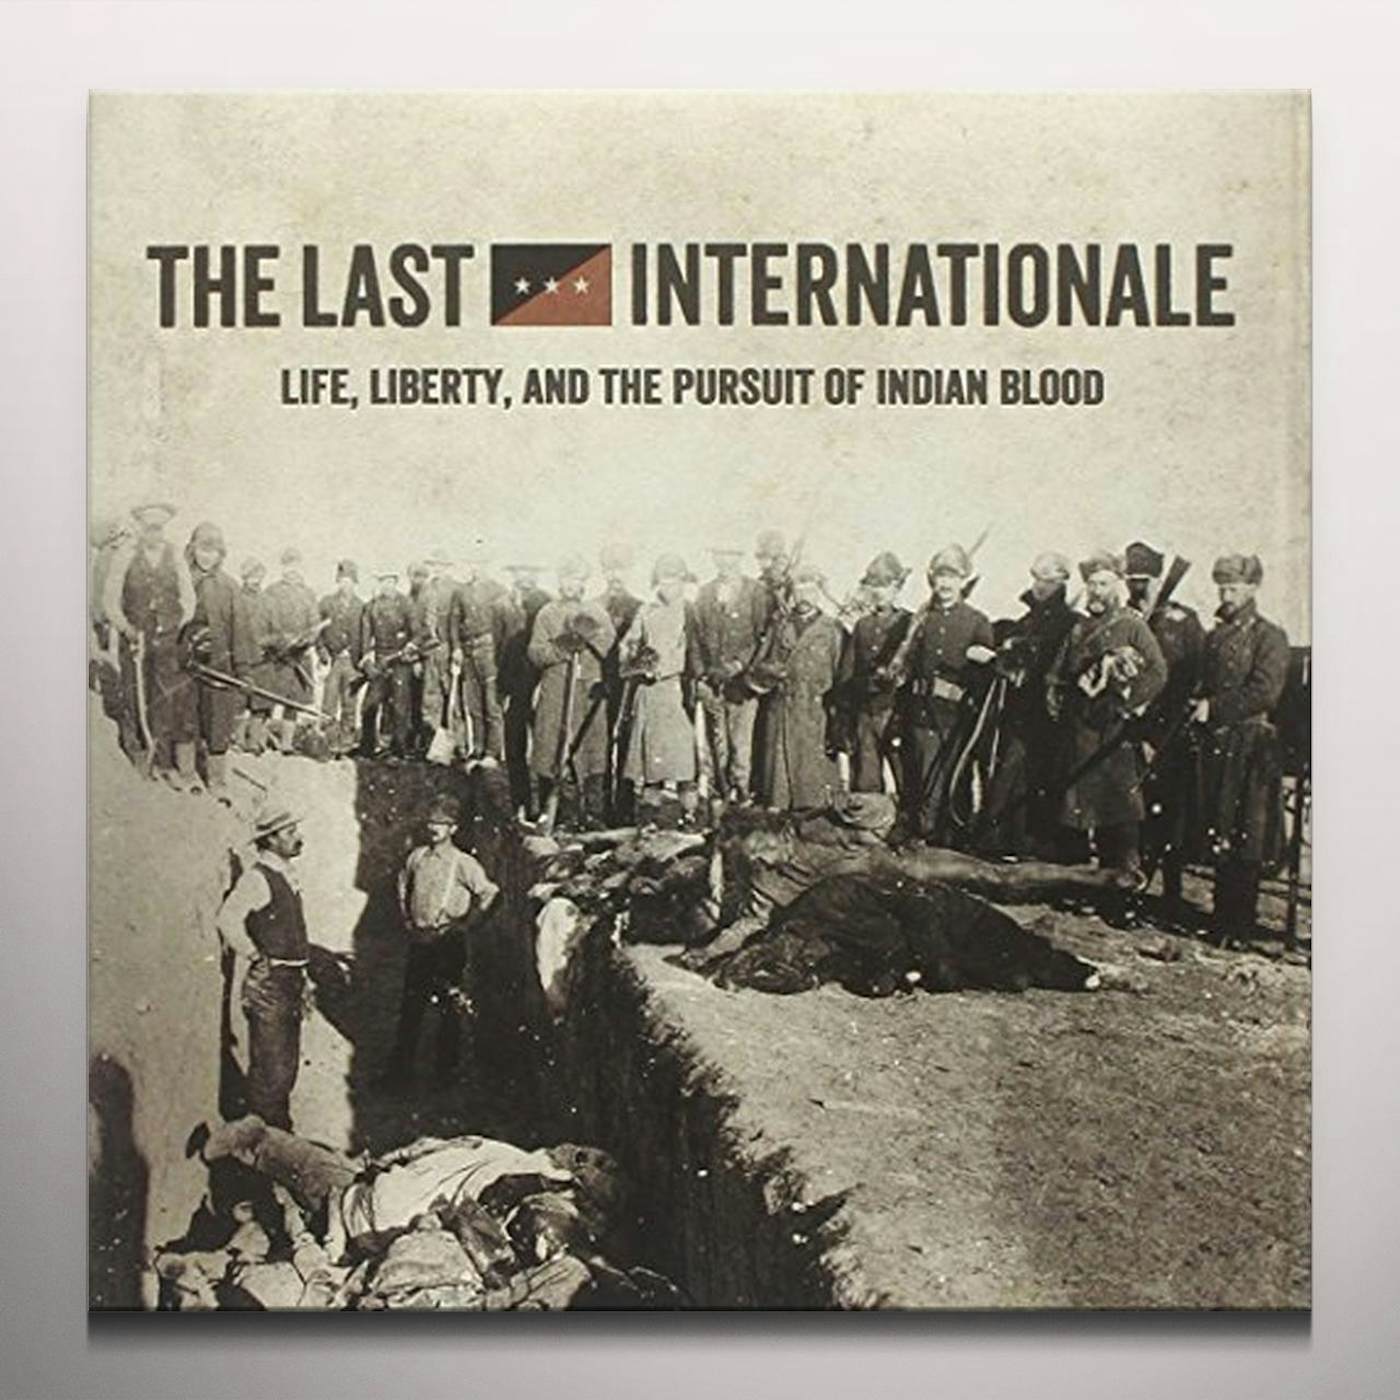 The Last Internationale  LIFE LIBERTY & THE PURSUIT OF INDIAN BLOOD Vinyl Record - Colored Vinyl